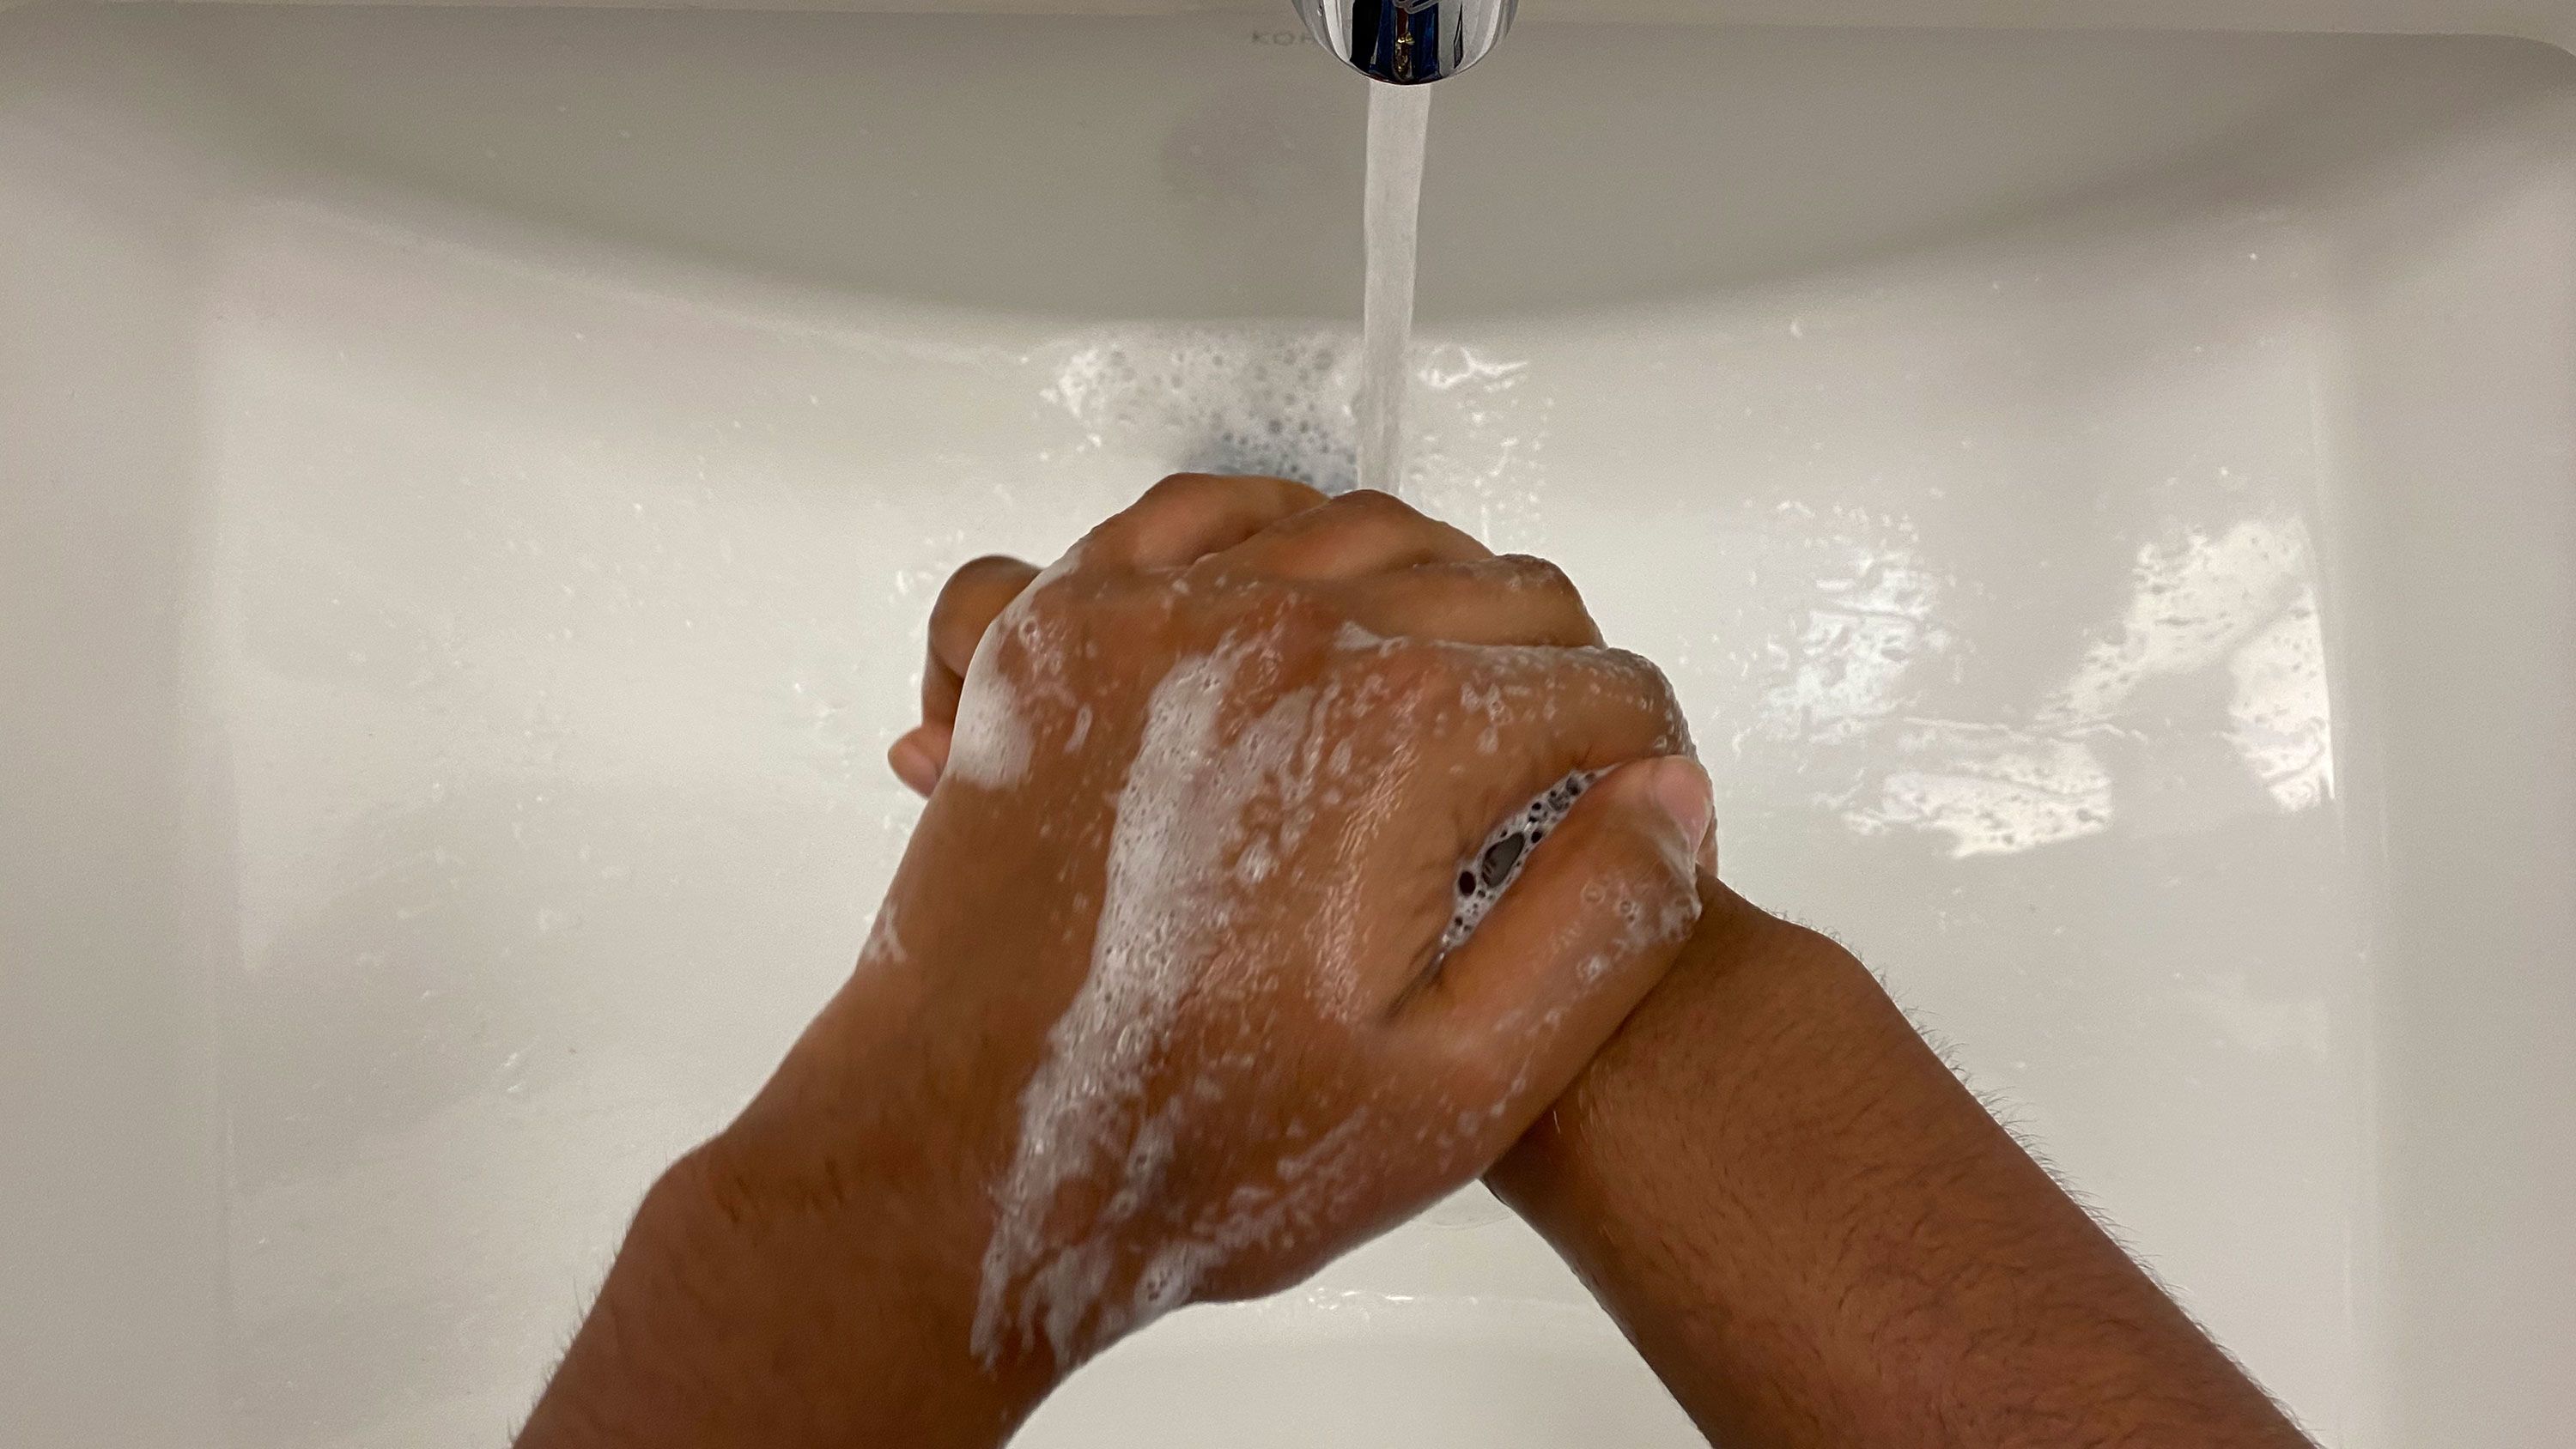 What's the best way to clean my hands during the coronavirus